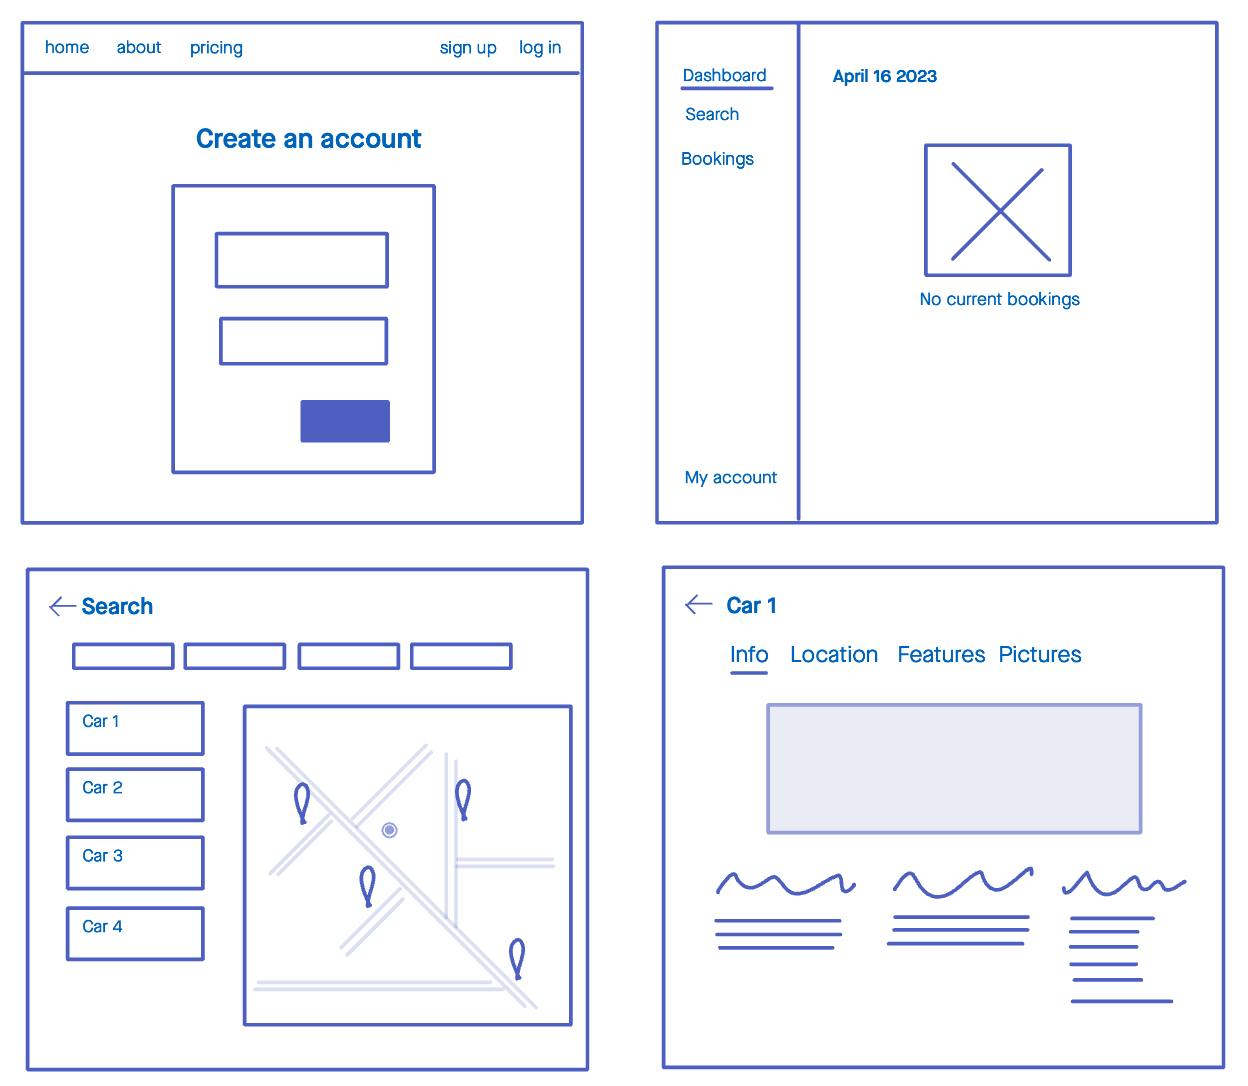 A wireframe of a care-share app with 4 pages: a sign up page with a menu at the top with links to home, about, pricing sign up and log in, a logged in section with a menu to the right with links to a dashboard, search, bookings and my account and a content area to the right. A search page with no navigation and a lot of filters, search results and a map and finally a page for the car with several tabs for information, location, features and pictures.